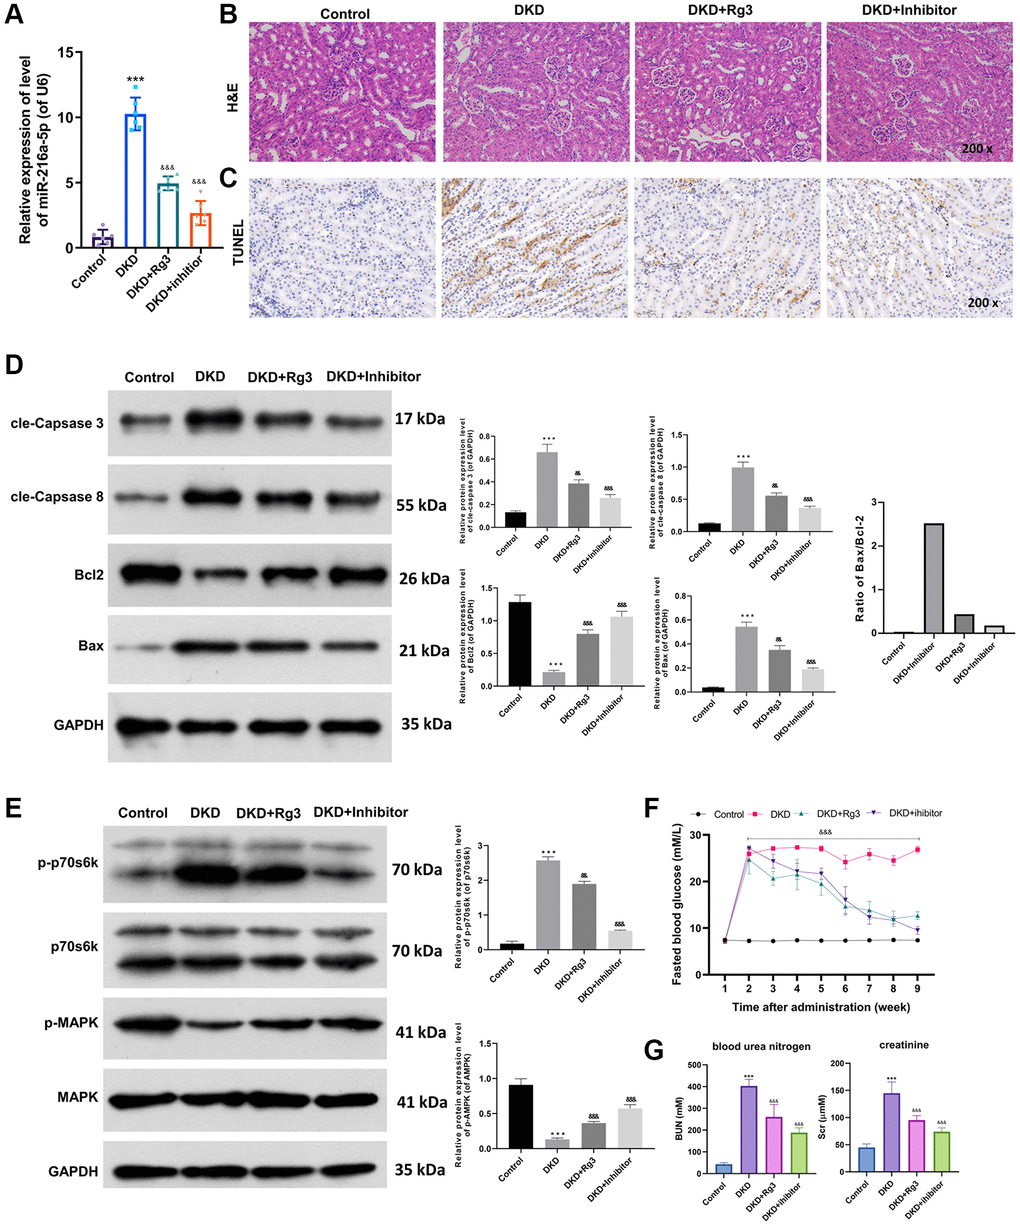 Rg3 or miR-216a-5p inhibition alleviates kidney injury, prevents apoptosis, and induces MAPK pathway in kidney tissues of diabetic model mice. And we first fed mice with STZ to build a mouse diabetes model, and then treated by oral gavage of the 20 mg/kg Rg3 for 8 weeks or injected with miR-216a-5p inhibitors through a tail vein (once a day for 3 days). (A) qRT-PCR was adopted to assess the change of miR-216a-5p in the mice kidney tissues. (B) H&E staining indicated the pathological change of kidney tissues (Magnification, 200×). (C) TUNEL staining for the confirmation of cell apoptosis (Magnification, 200×). (D) Western blot was applied to analyze the expression changes of apoptosis-related proteins. (E) Western blot showed the changes of p-p70s6k, p70s6k, p-MAPK, and MAPK expressions. (F) Fasting blood glucose. (G) Blood urea nitrogen and creatinine. ***P &&P &&&P 